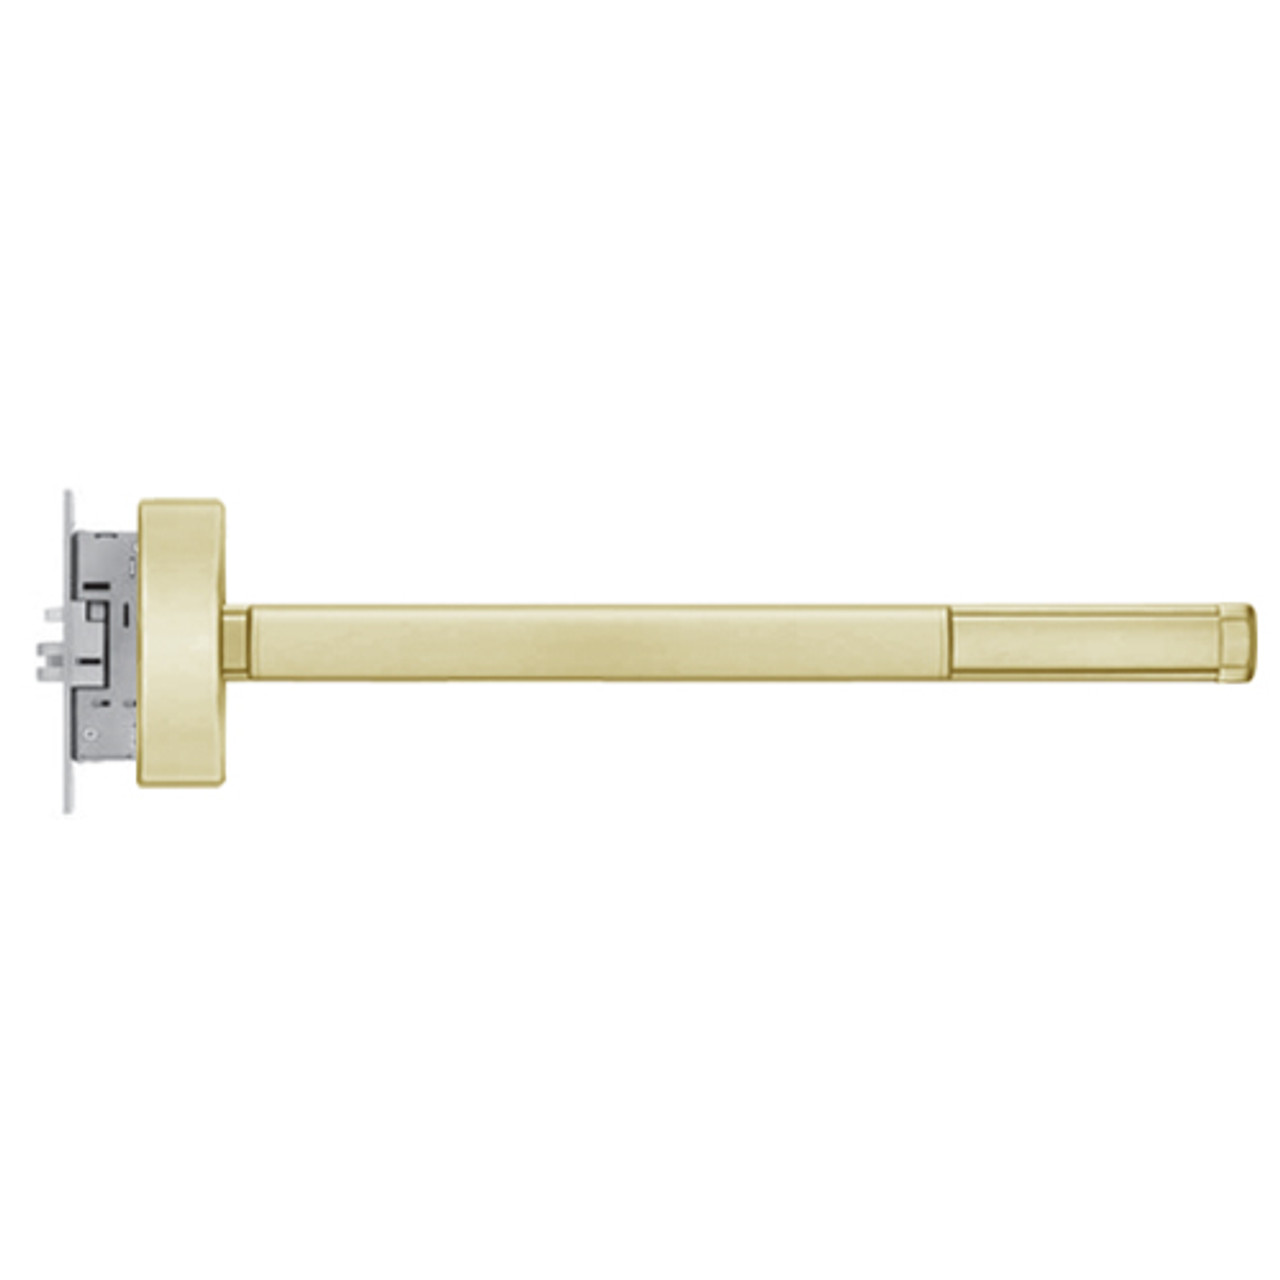 TS2305-LHR-606-36 PHI 2300 Series Apex Mortise Exit Device with Touchbar Monitoring Switch Prepped for Key Controls Thumb Piece in Satin Brass Finish